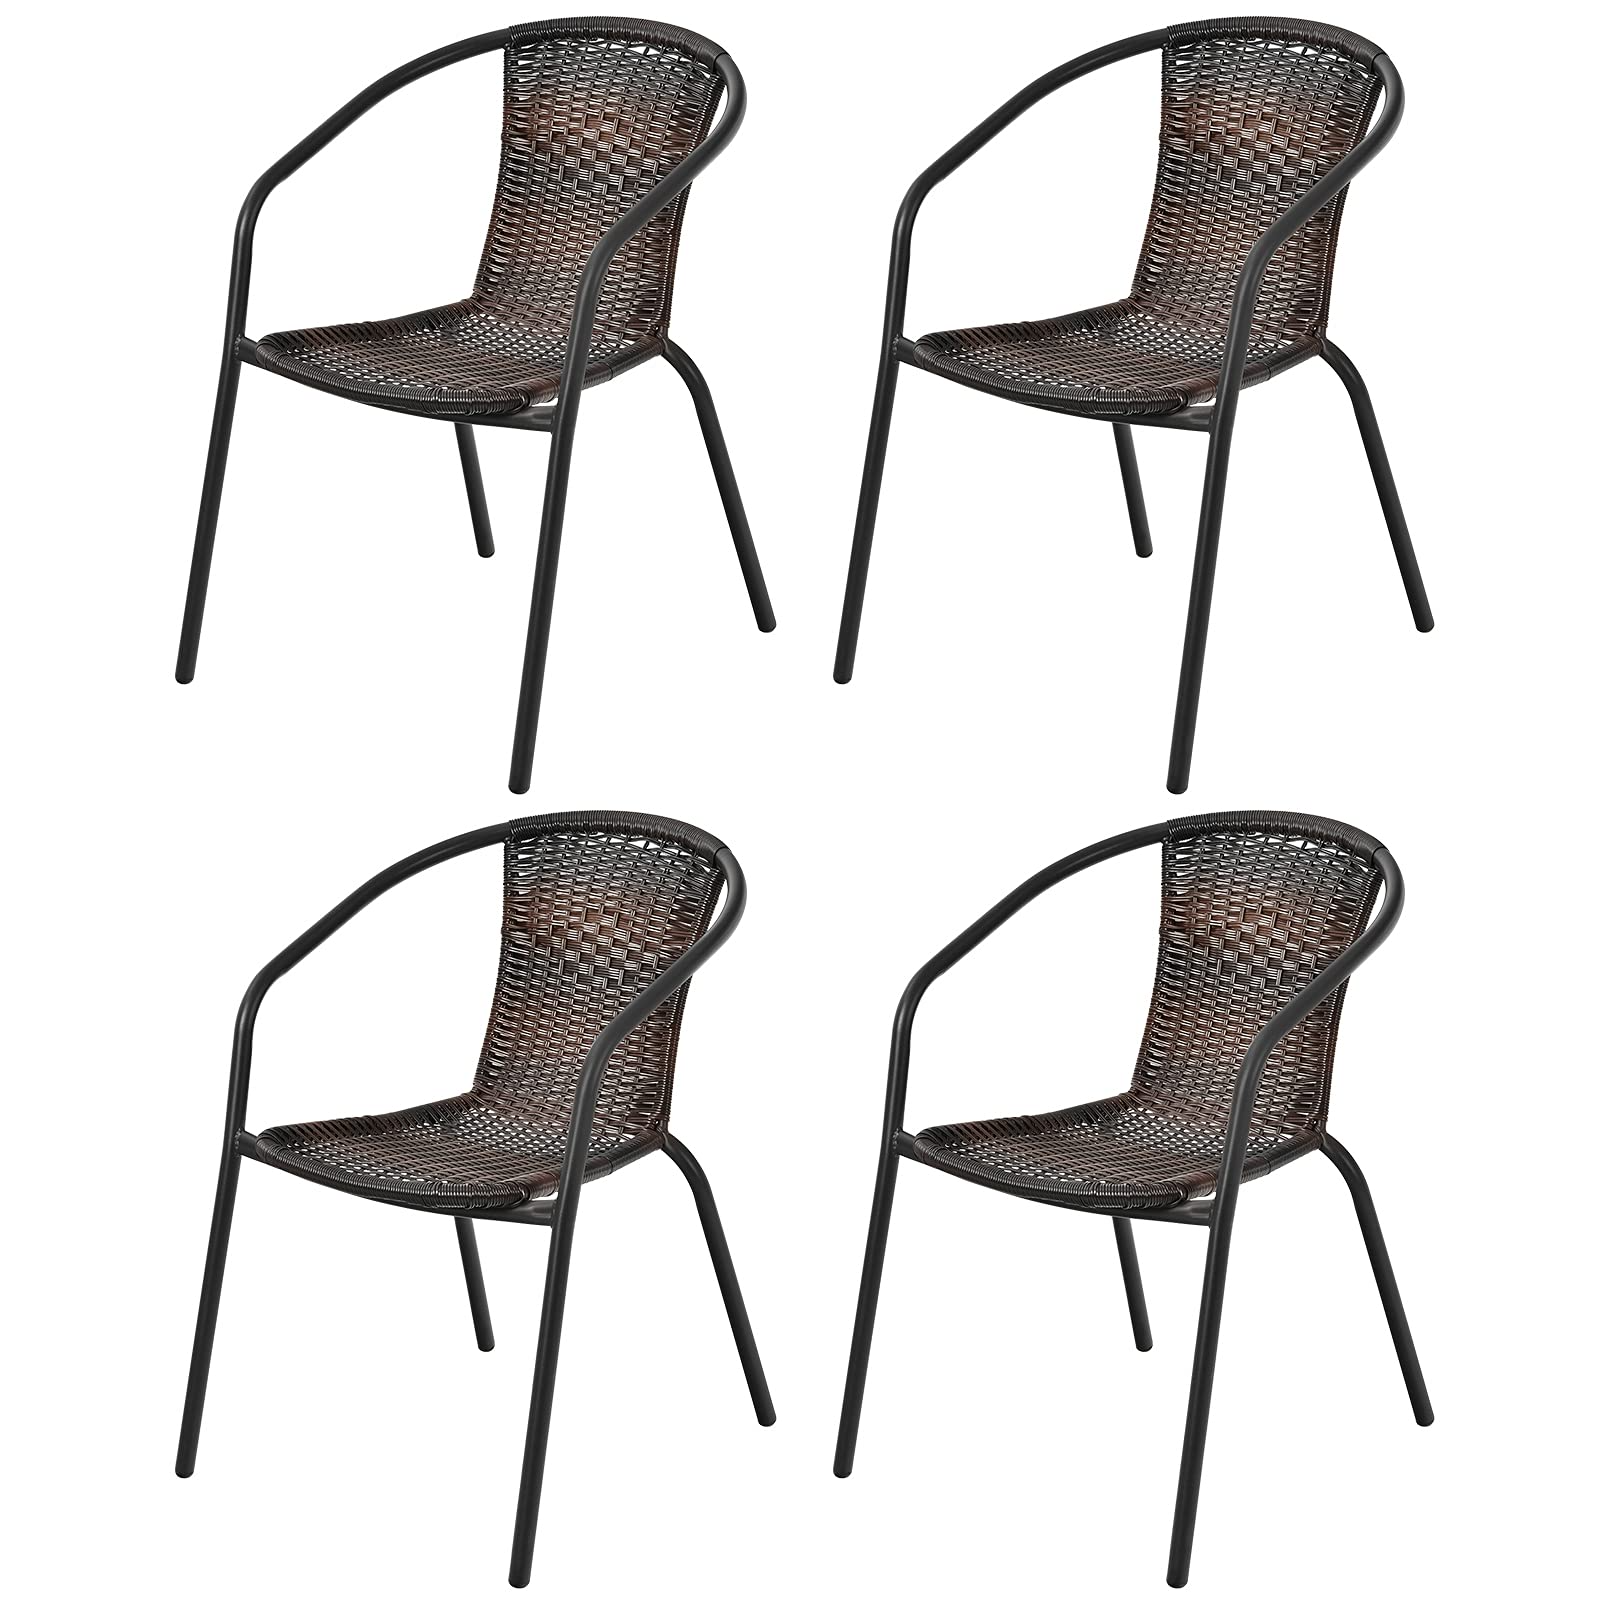 Giantex Set of 4 Outdoor Chairs Rattan Dining Chair